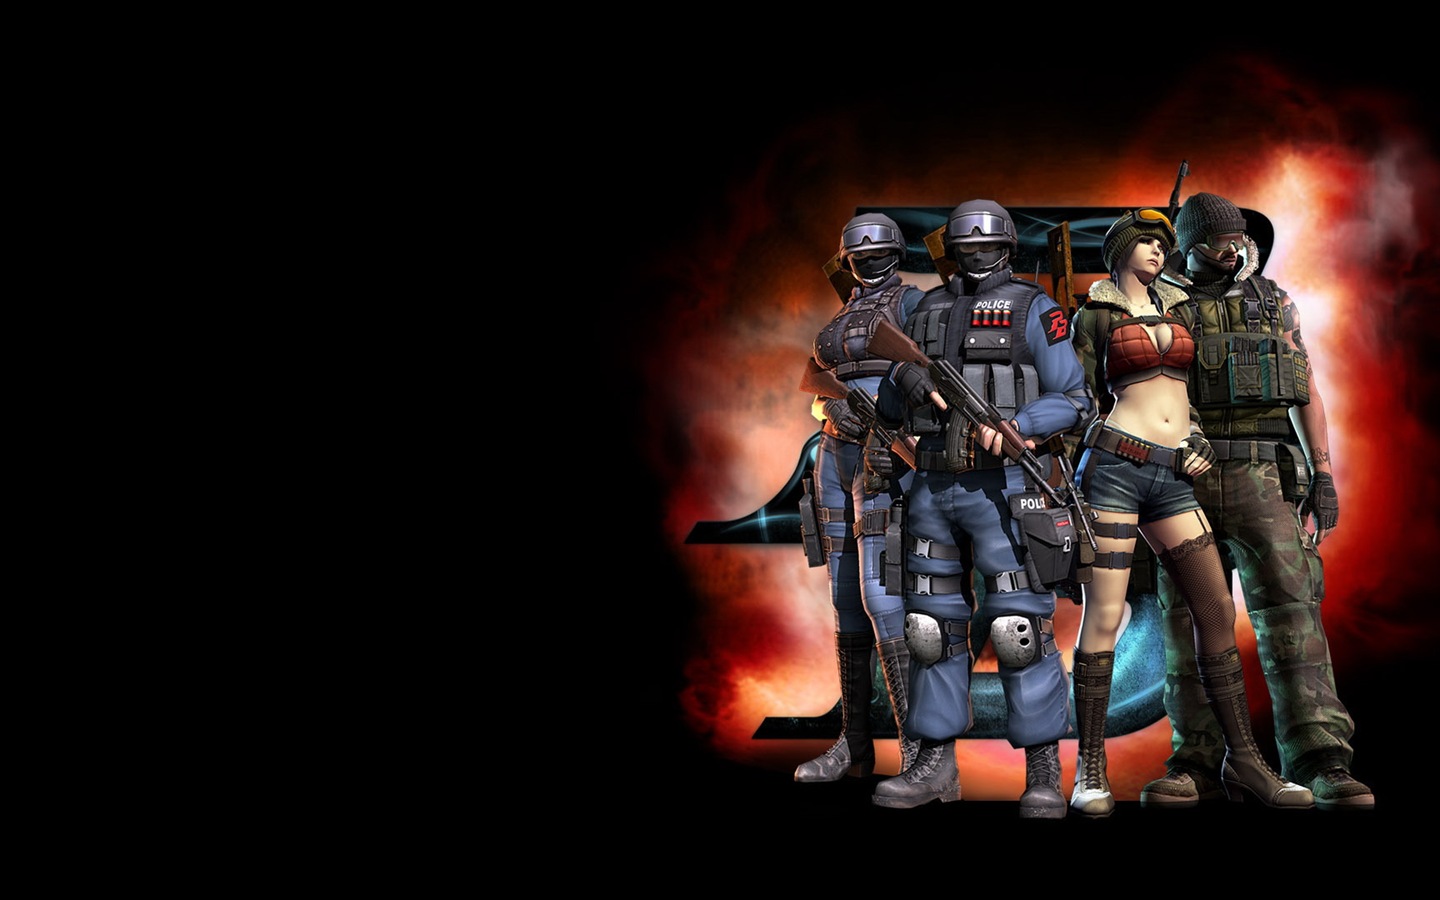 Point Blank HD game wallpapers #14 - 1440x900